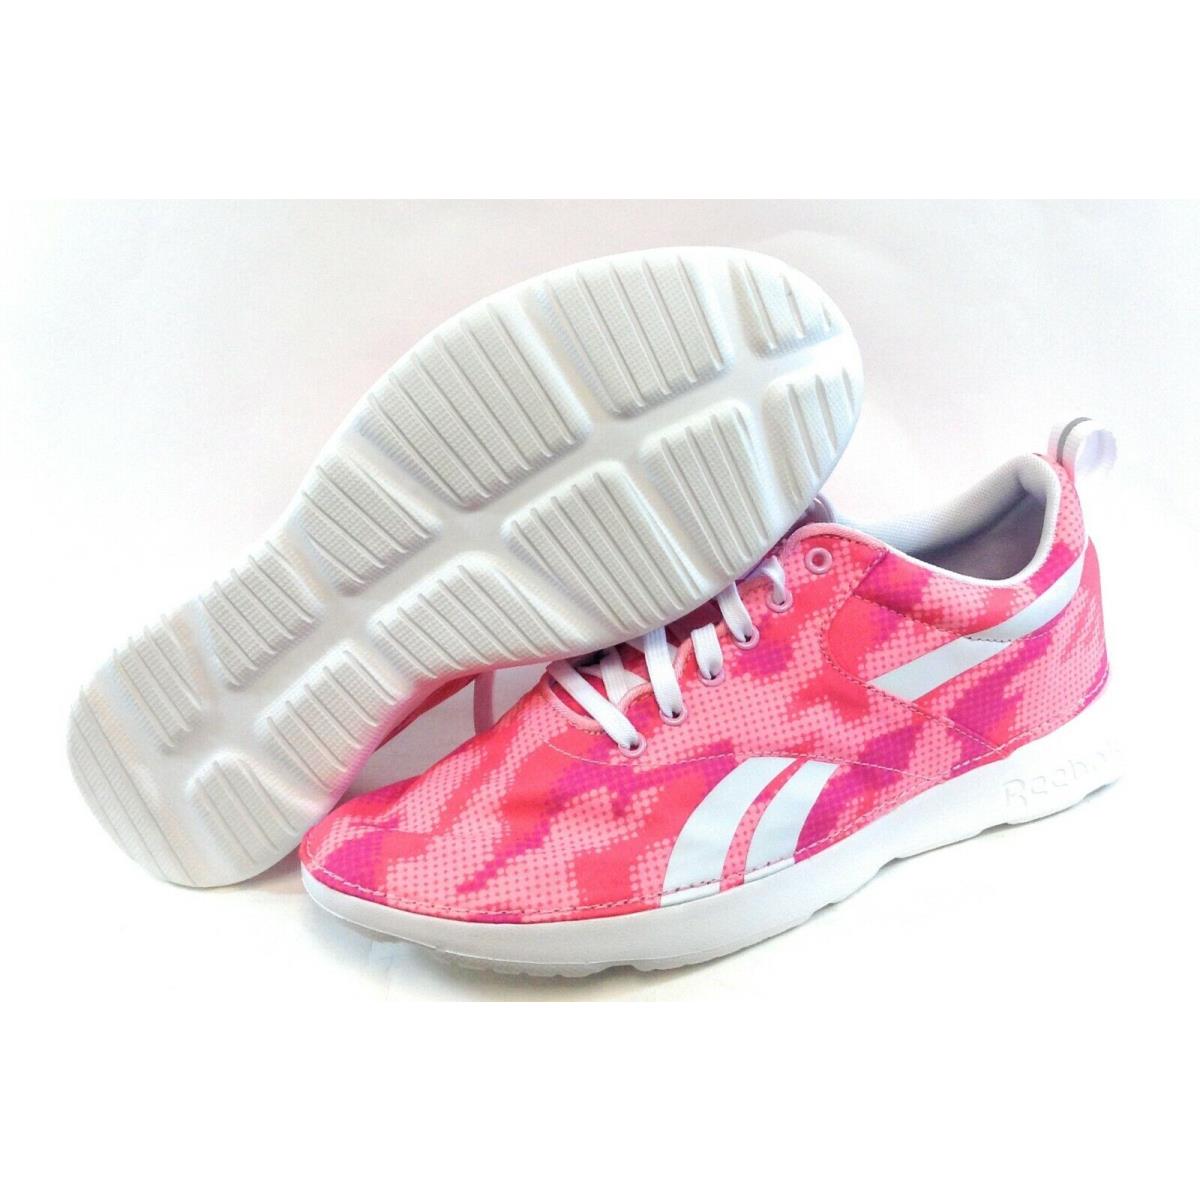 Womens Reebok Royal Simple M44371 Light Pink White Running Sneakers Shoes - Pink